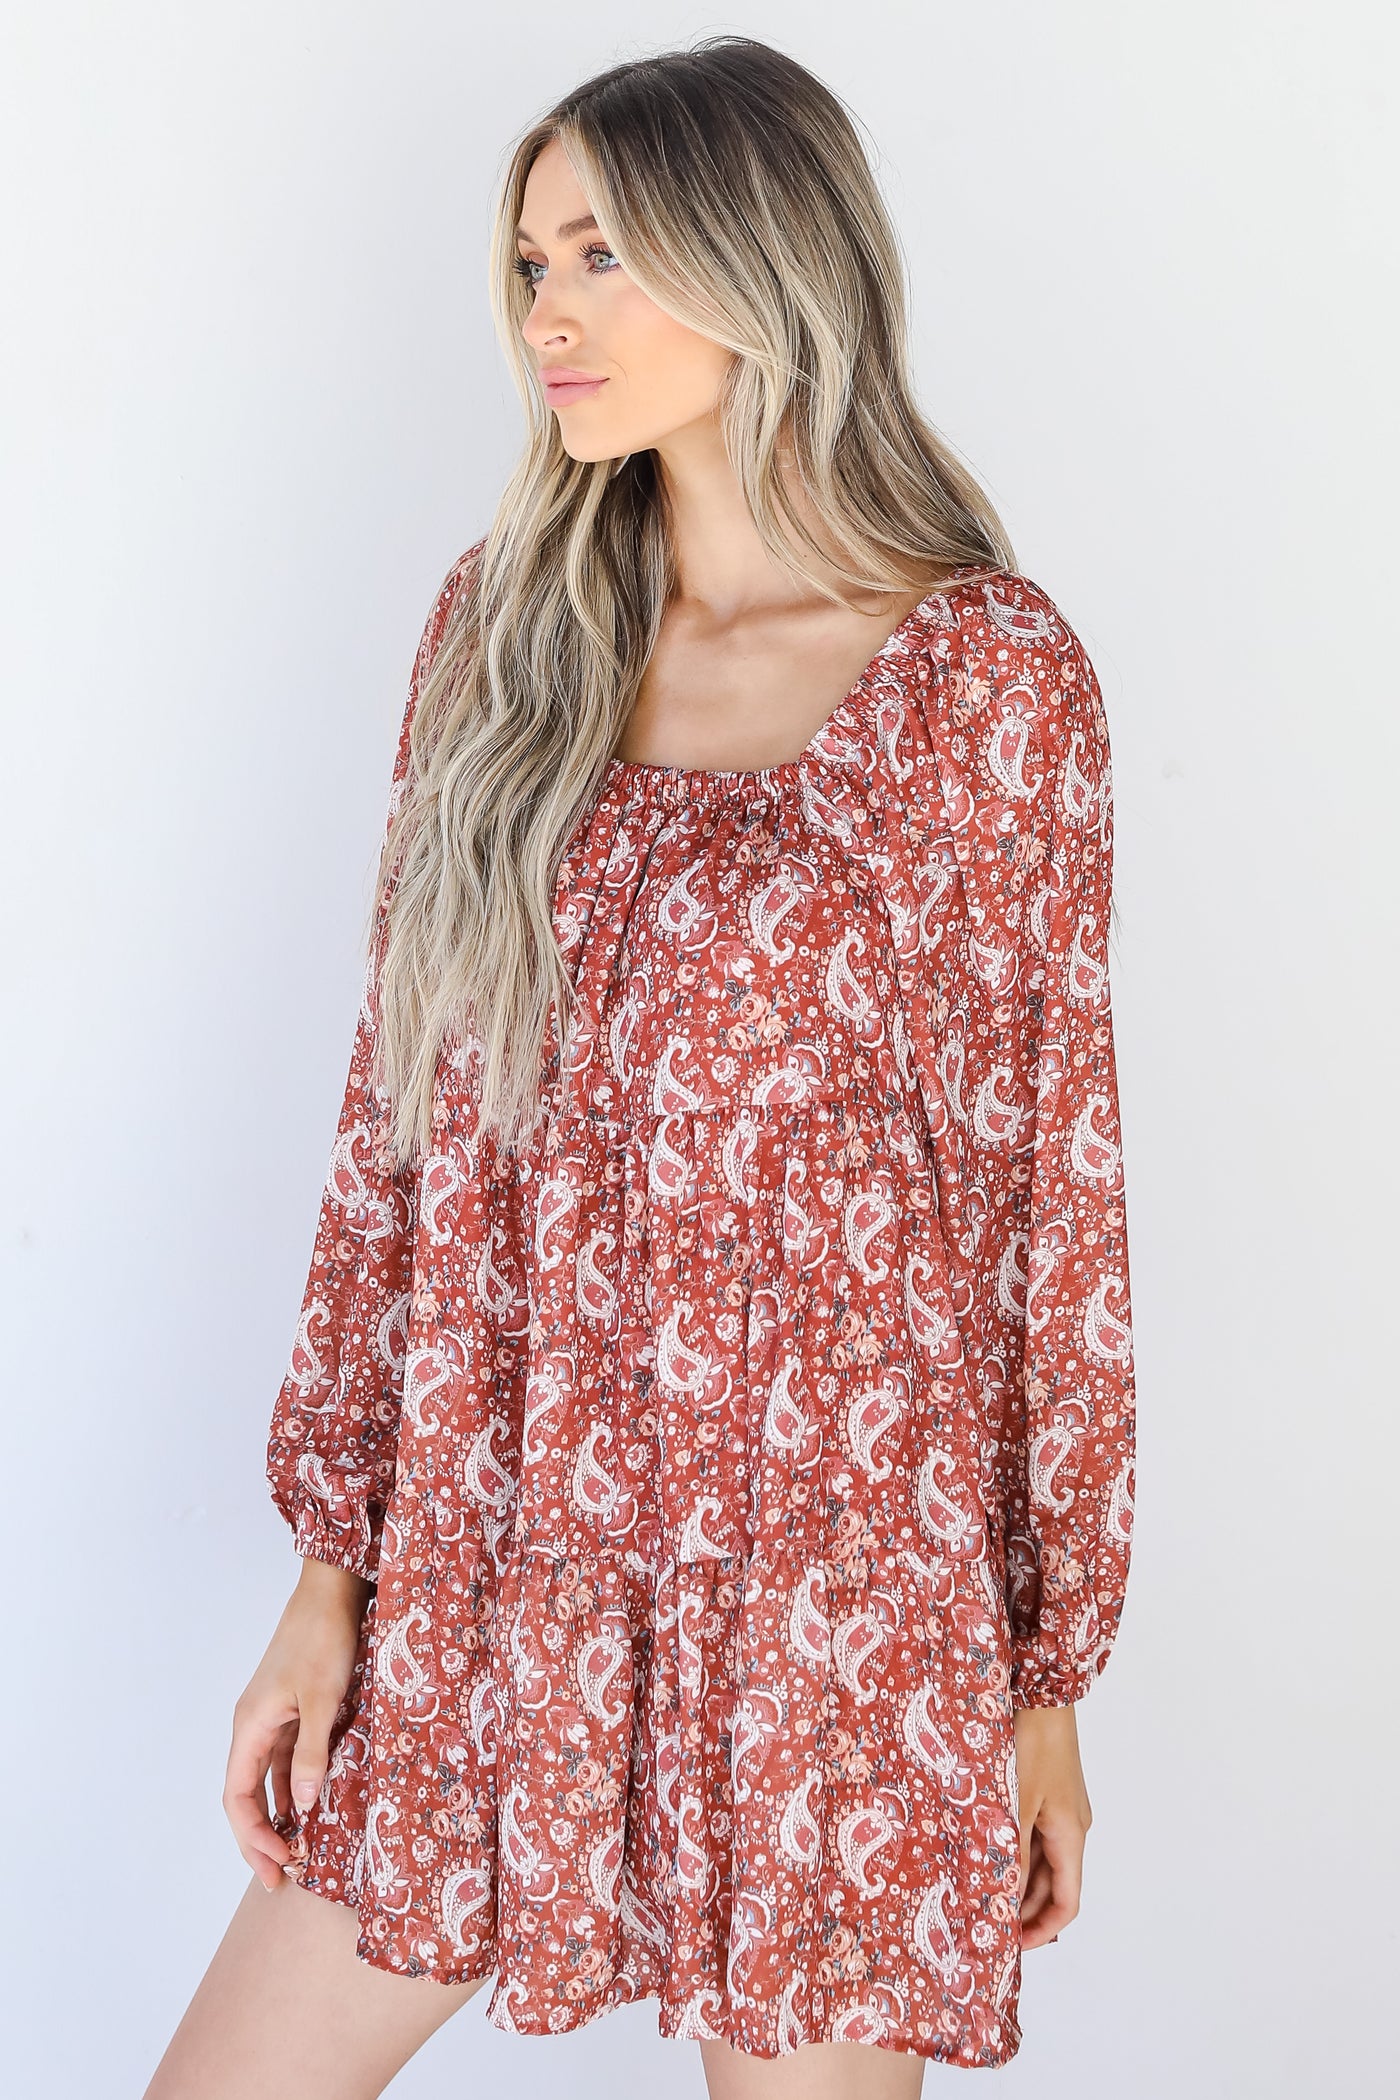 Floral Paisley Dress on model